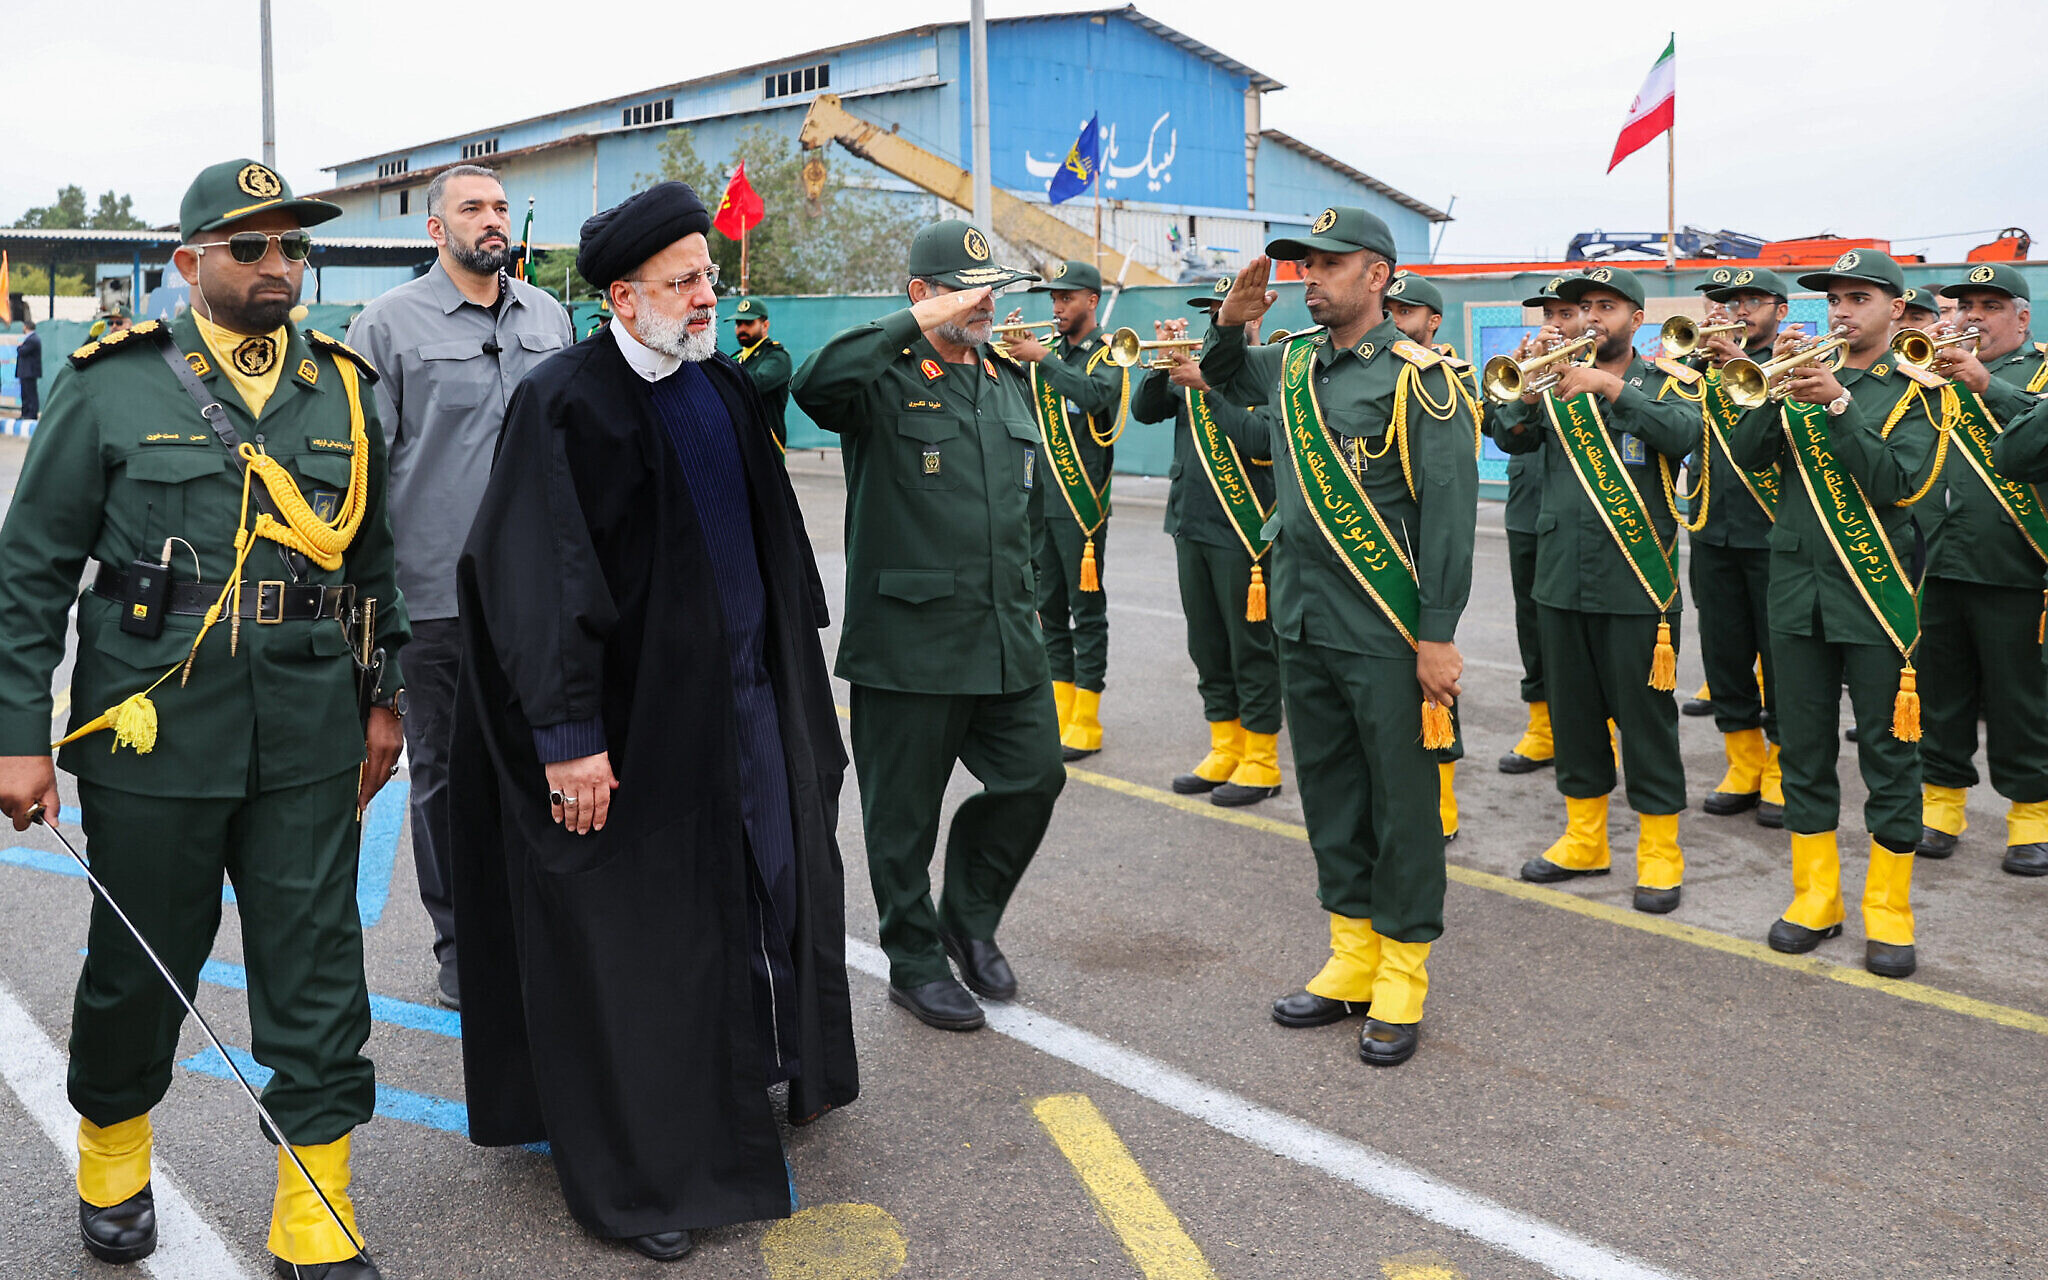 Iran’s Revolutionary Guard: A potent terror force seeking to reshape the Middle East